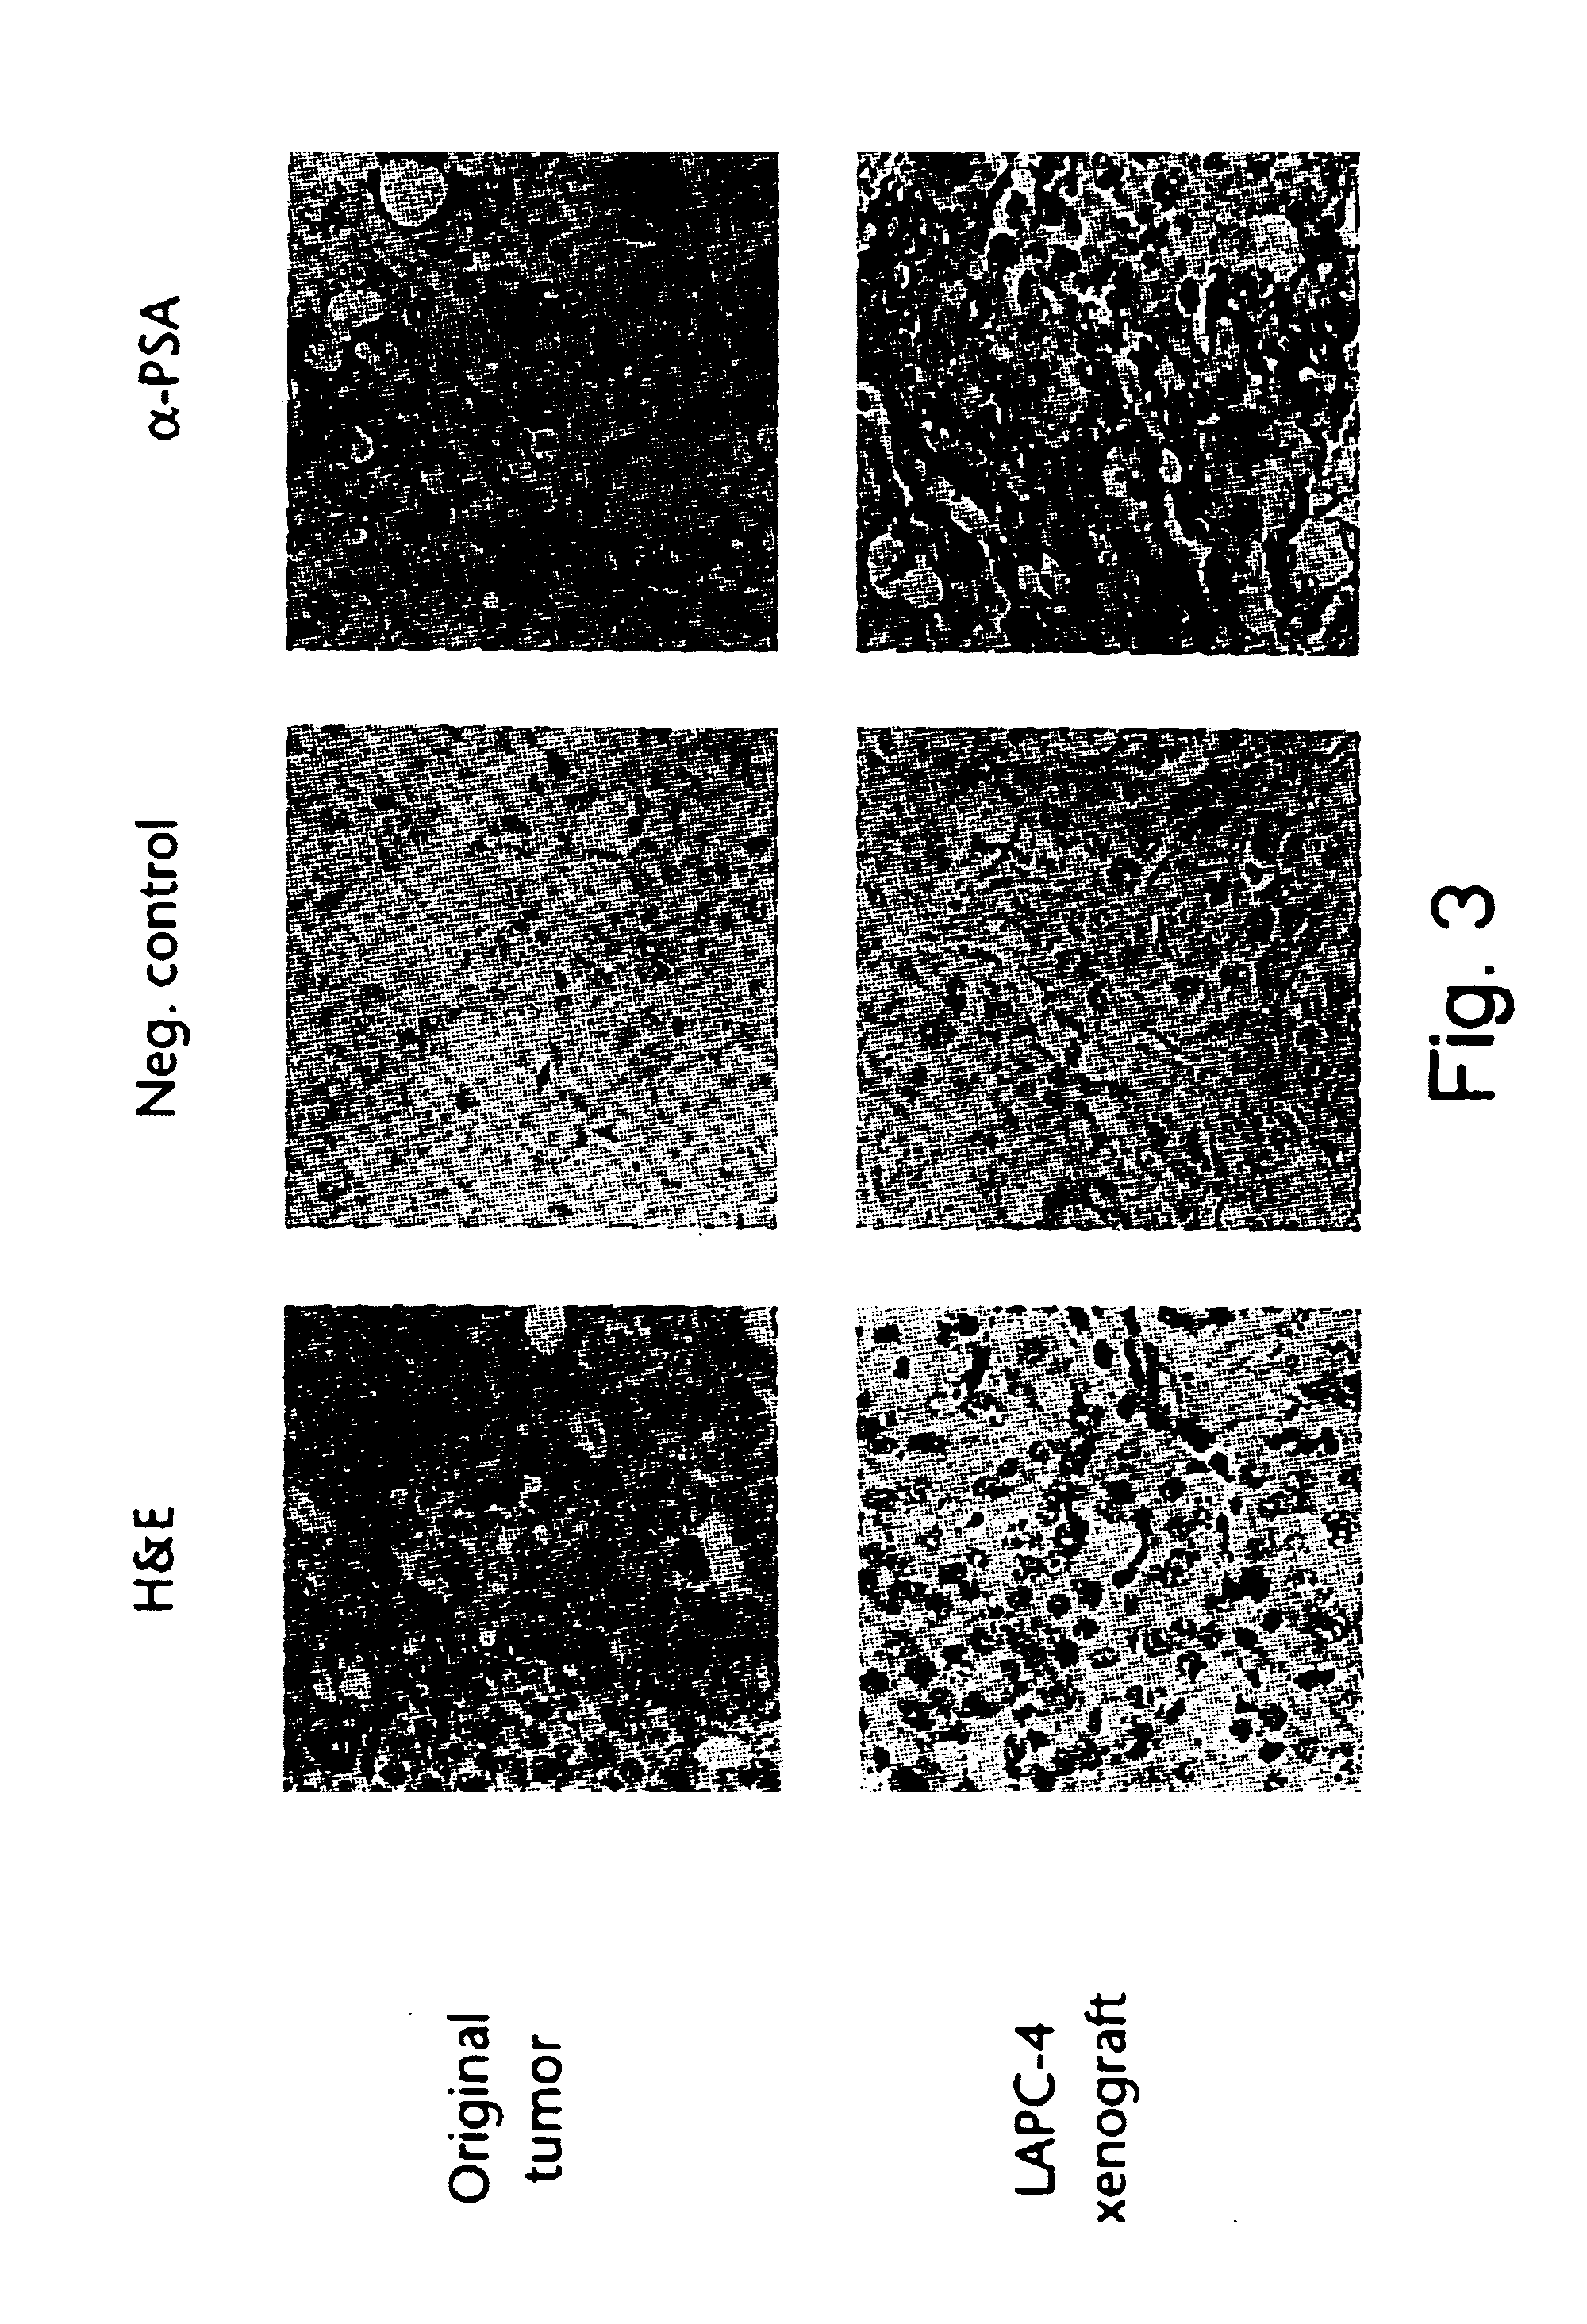 E25A protein, methods for producing and use thereof